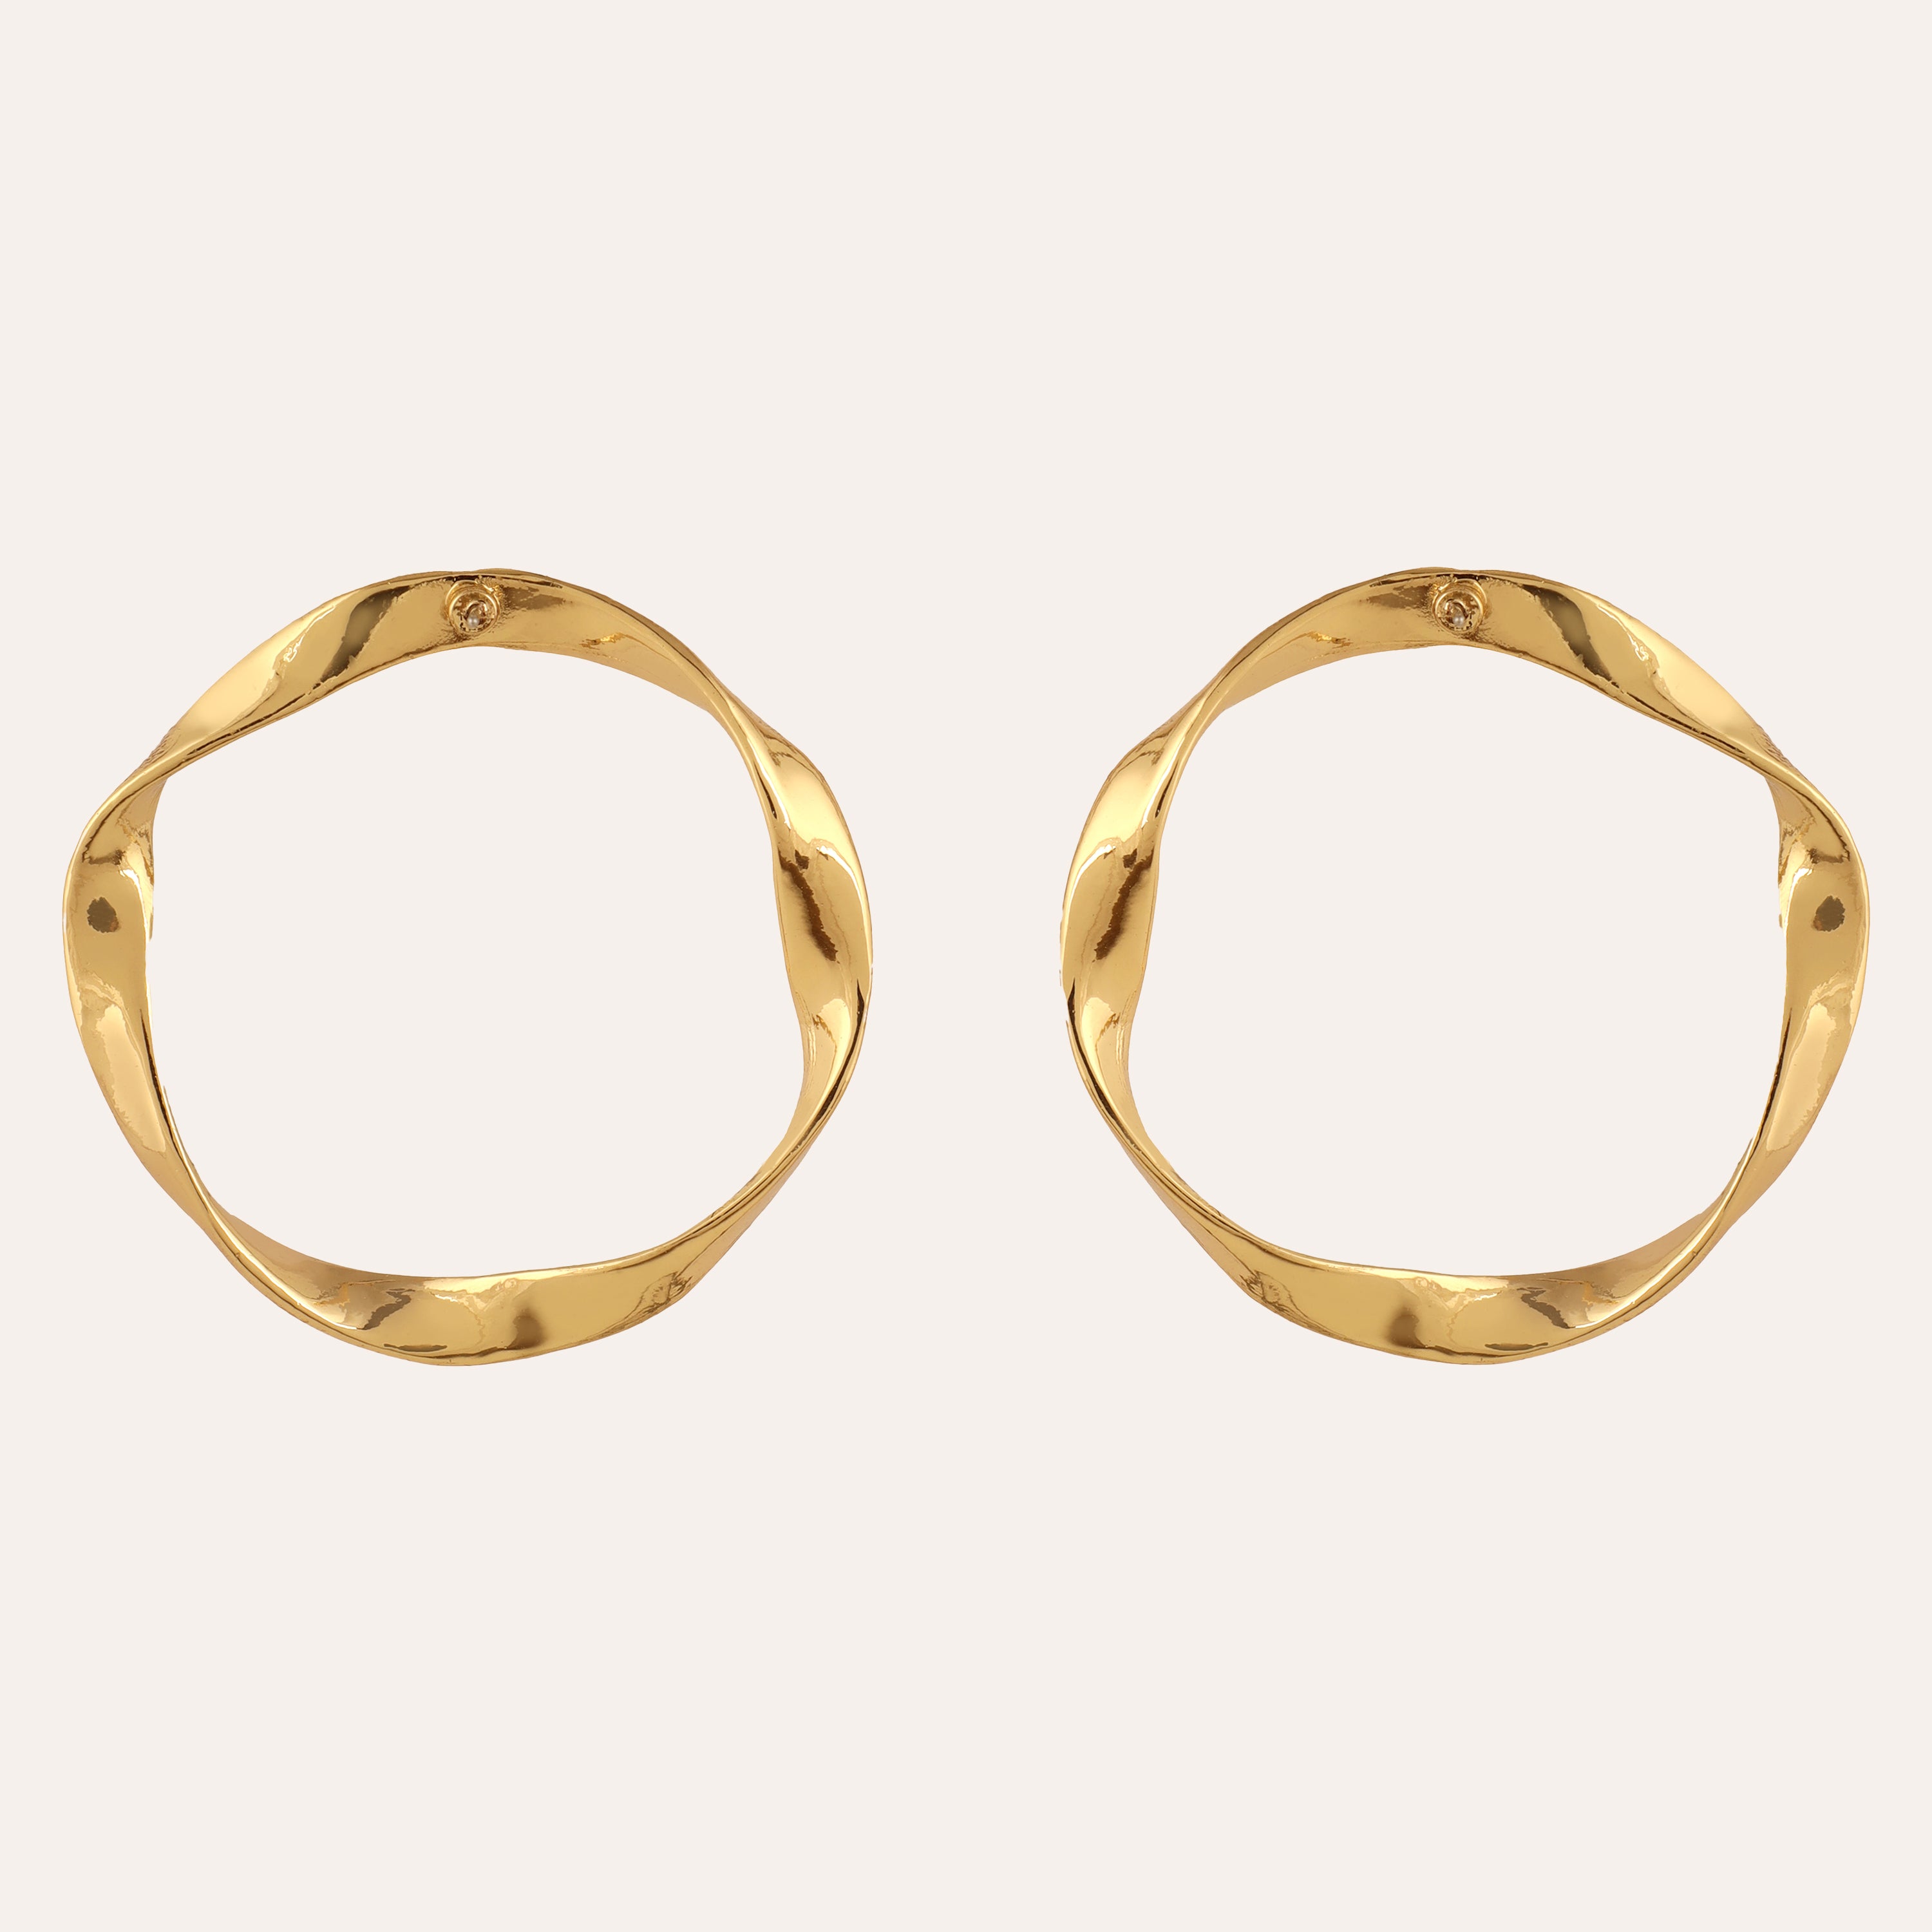 TFC Chunky Gold Plated Statement Hoop Earrings- Discover daily wear gold earrings including stud earrings, hoop earrings, and pearl earrings, perfect as earrings for women and earrings for girls.Find the cheapest fashion jewellery which is anti-tarnis​h only at The Fun company.